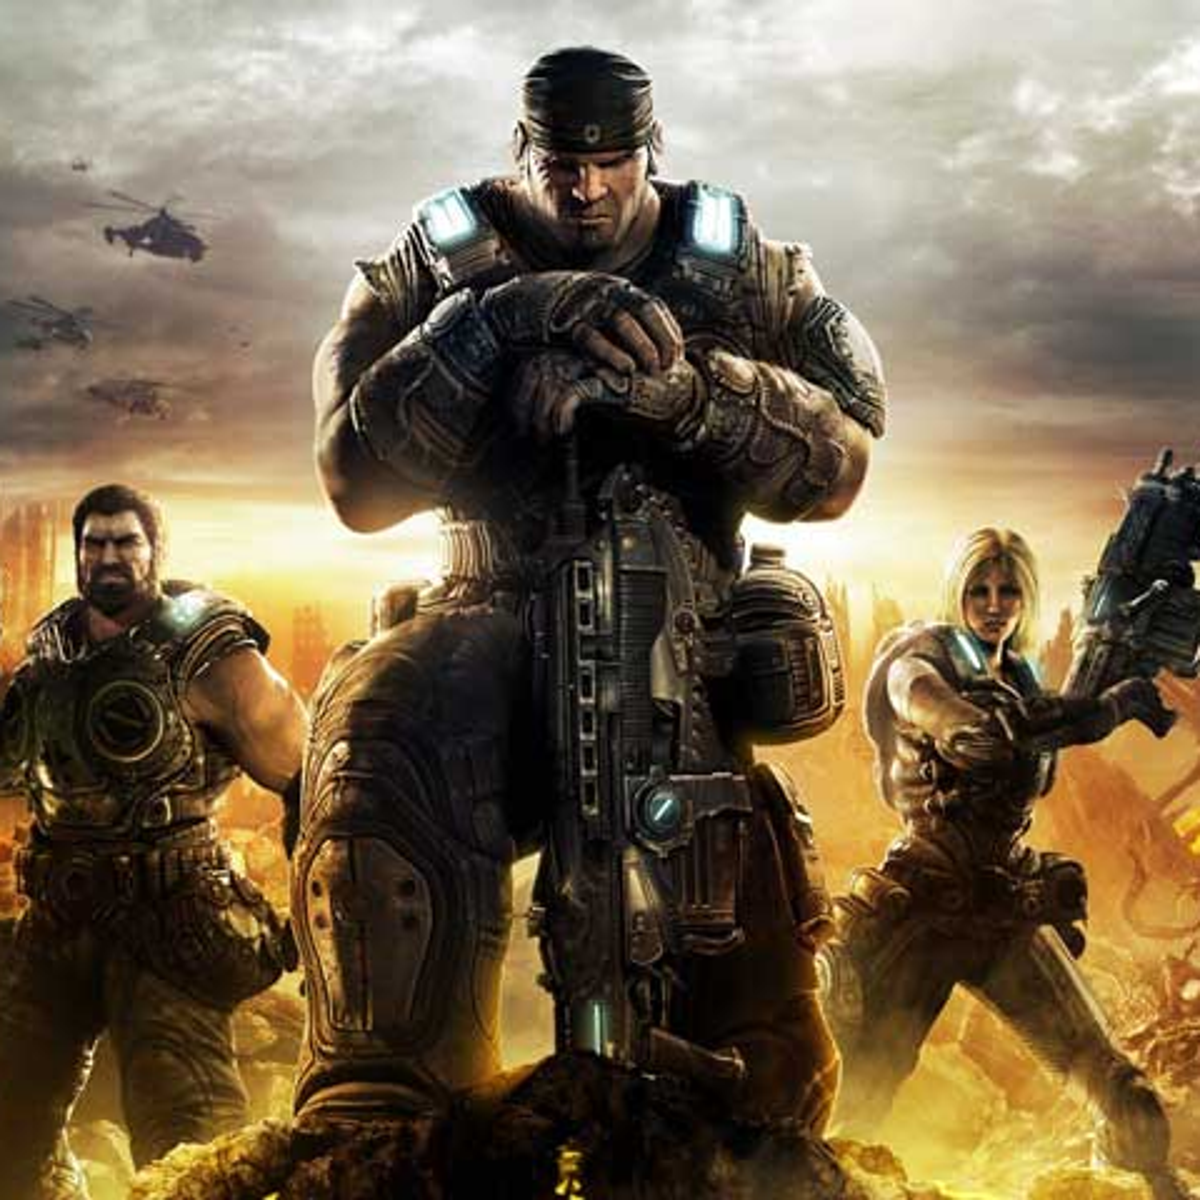 plug Mart tandarts Here's a video showing Gears of War 3 running on a PS3 devkit | VG247